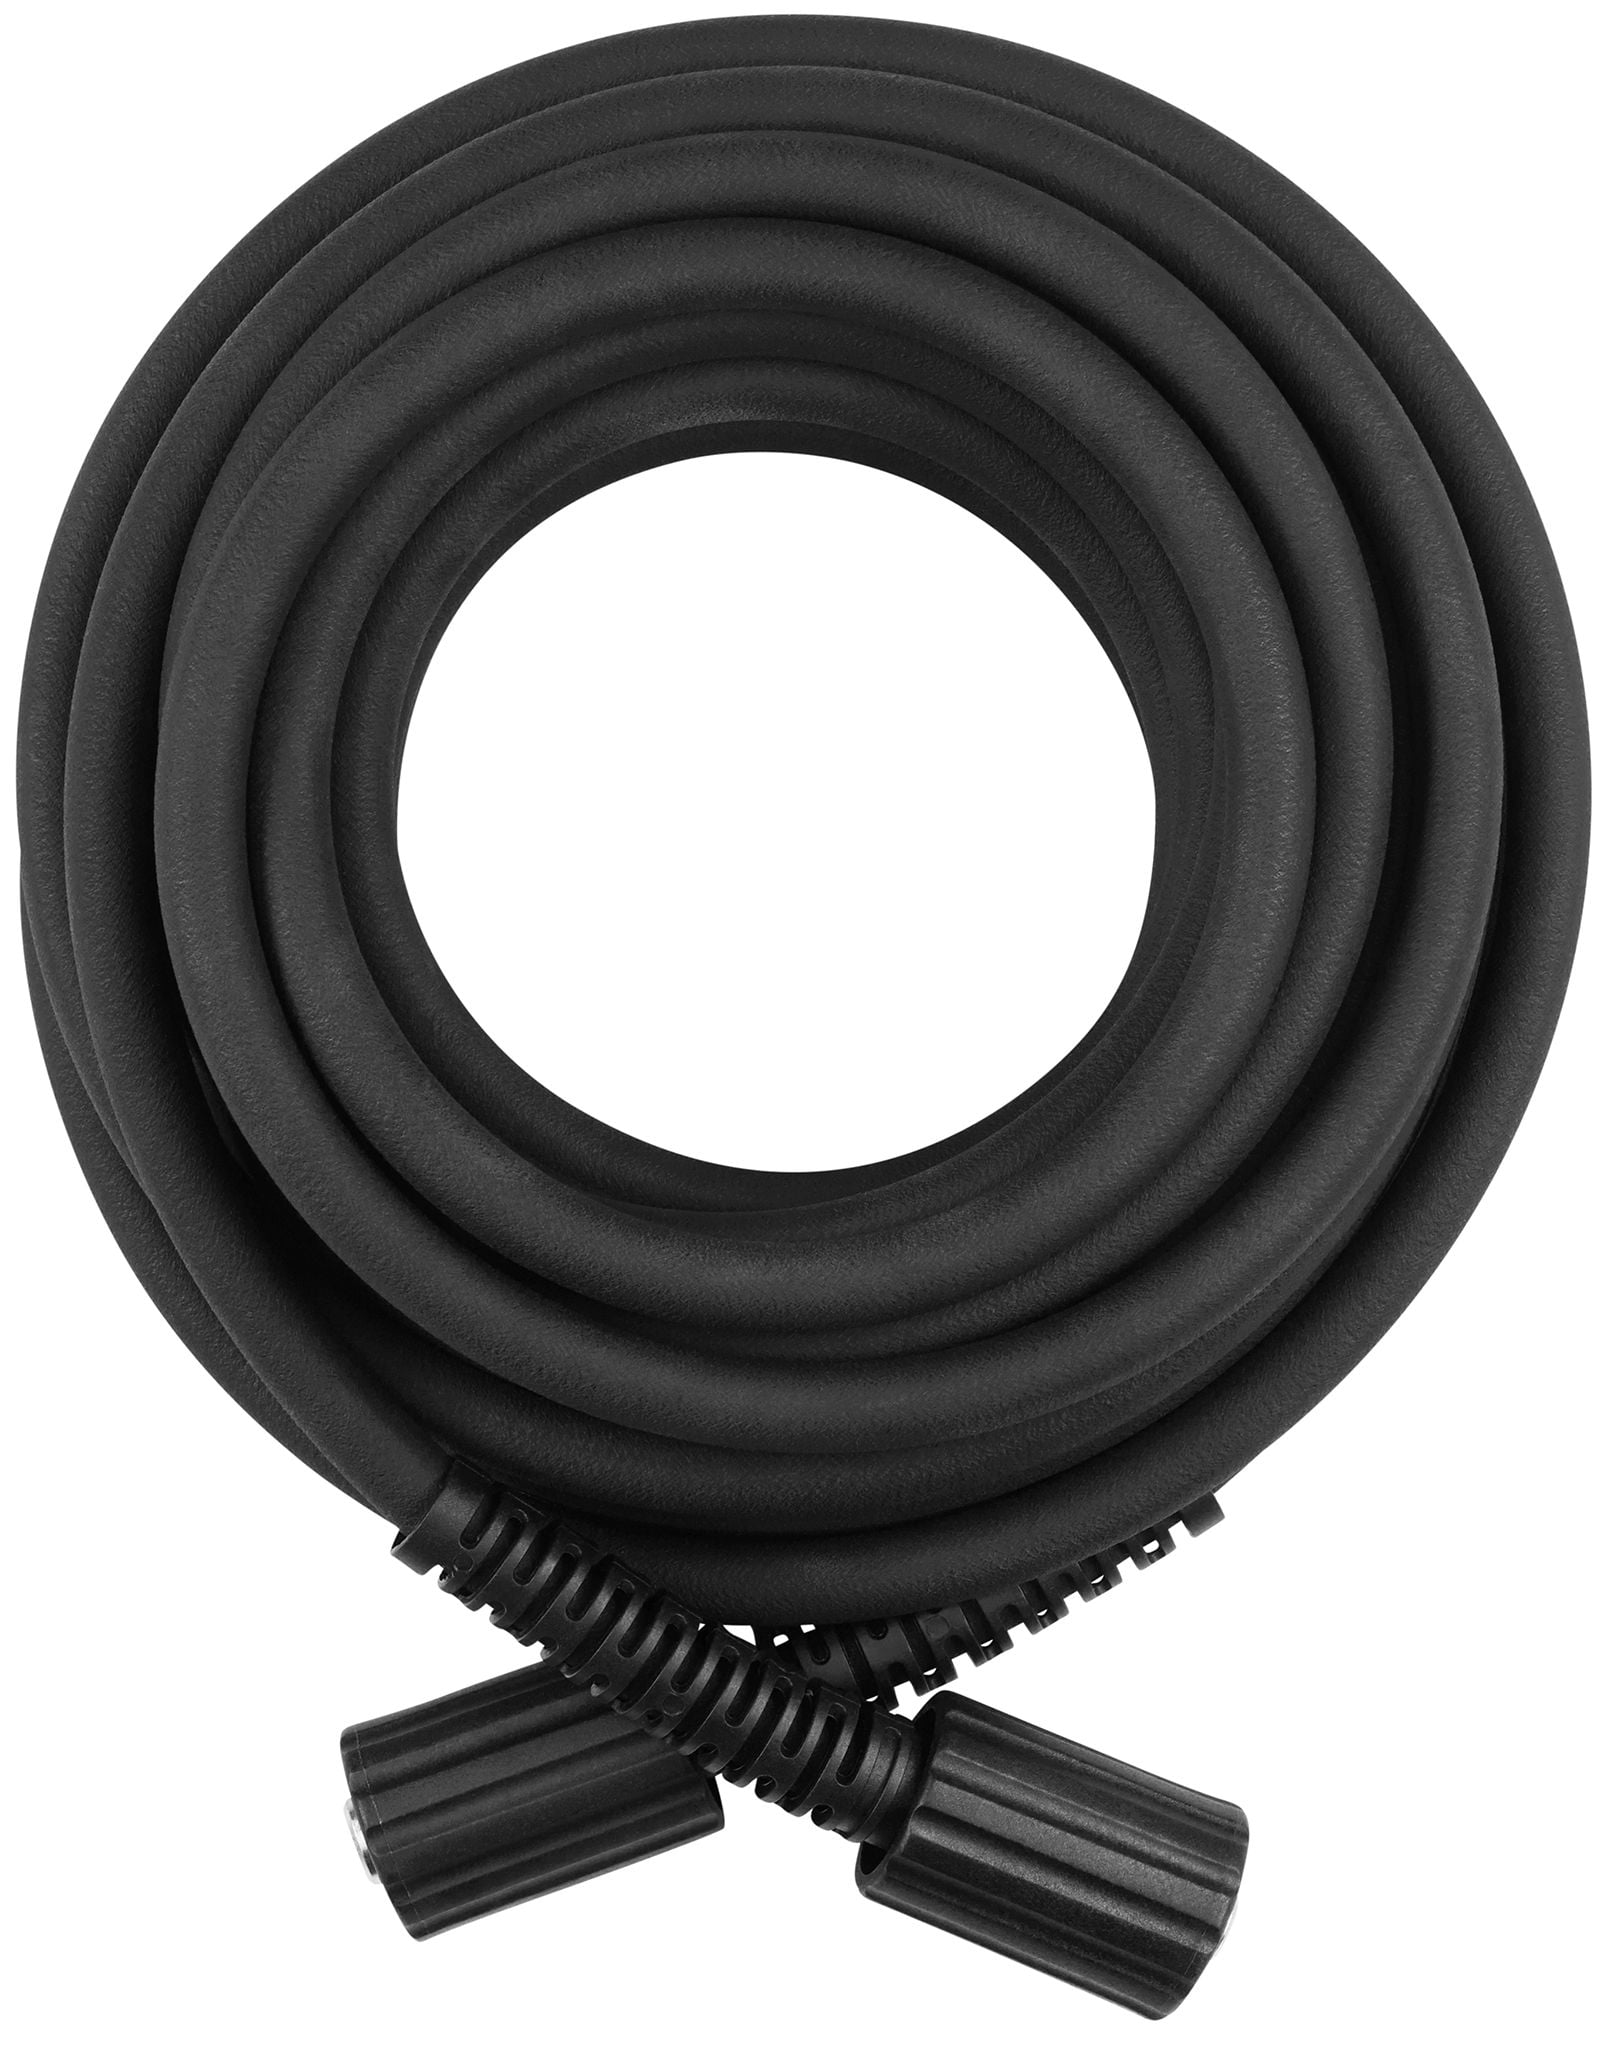 Hart 35' Pressure Washer Hose, Up to 3800 PSI